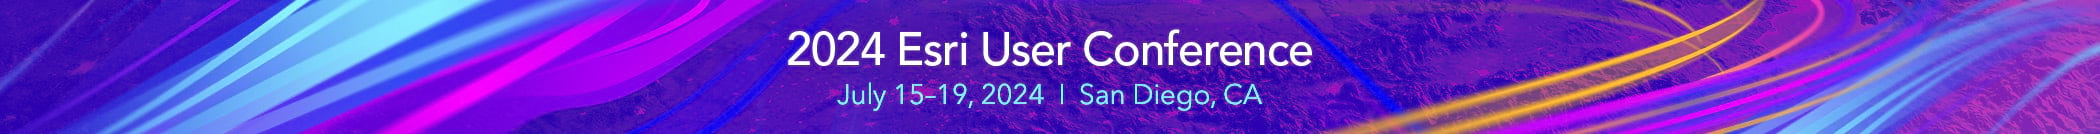 Join us at the 2024 Esri User Conference July 15 through 19, 2024 in San Diego, California.